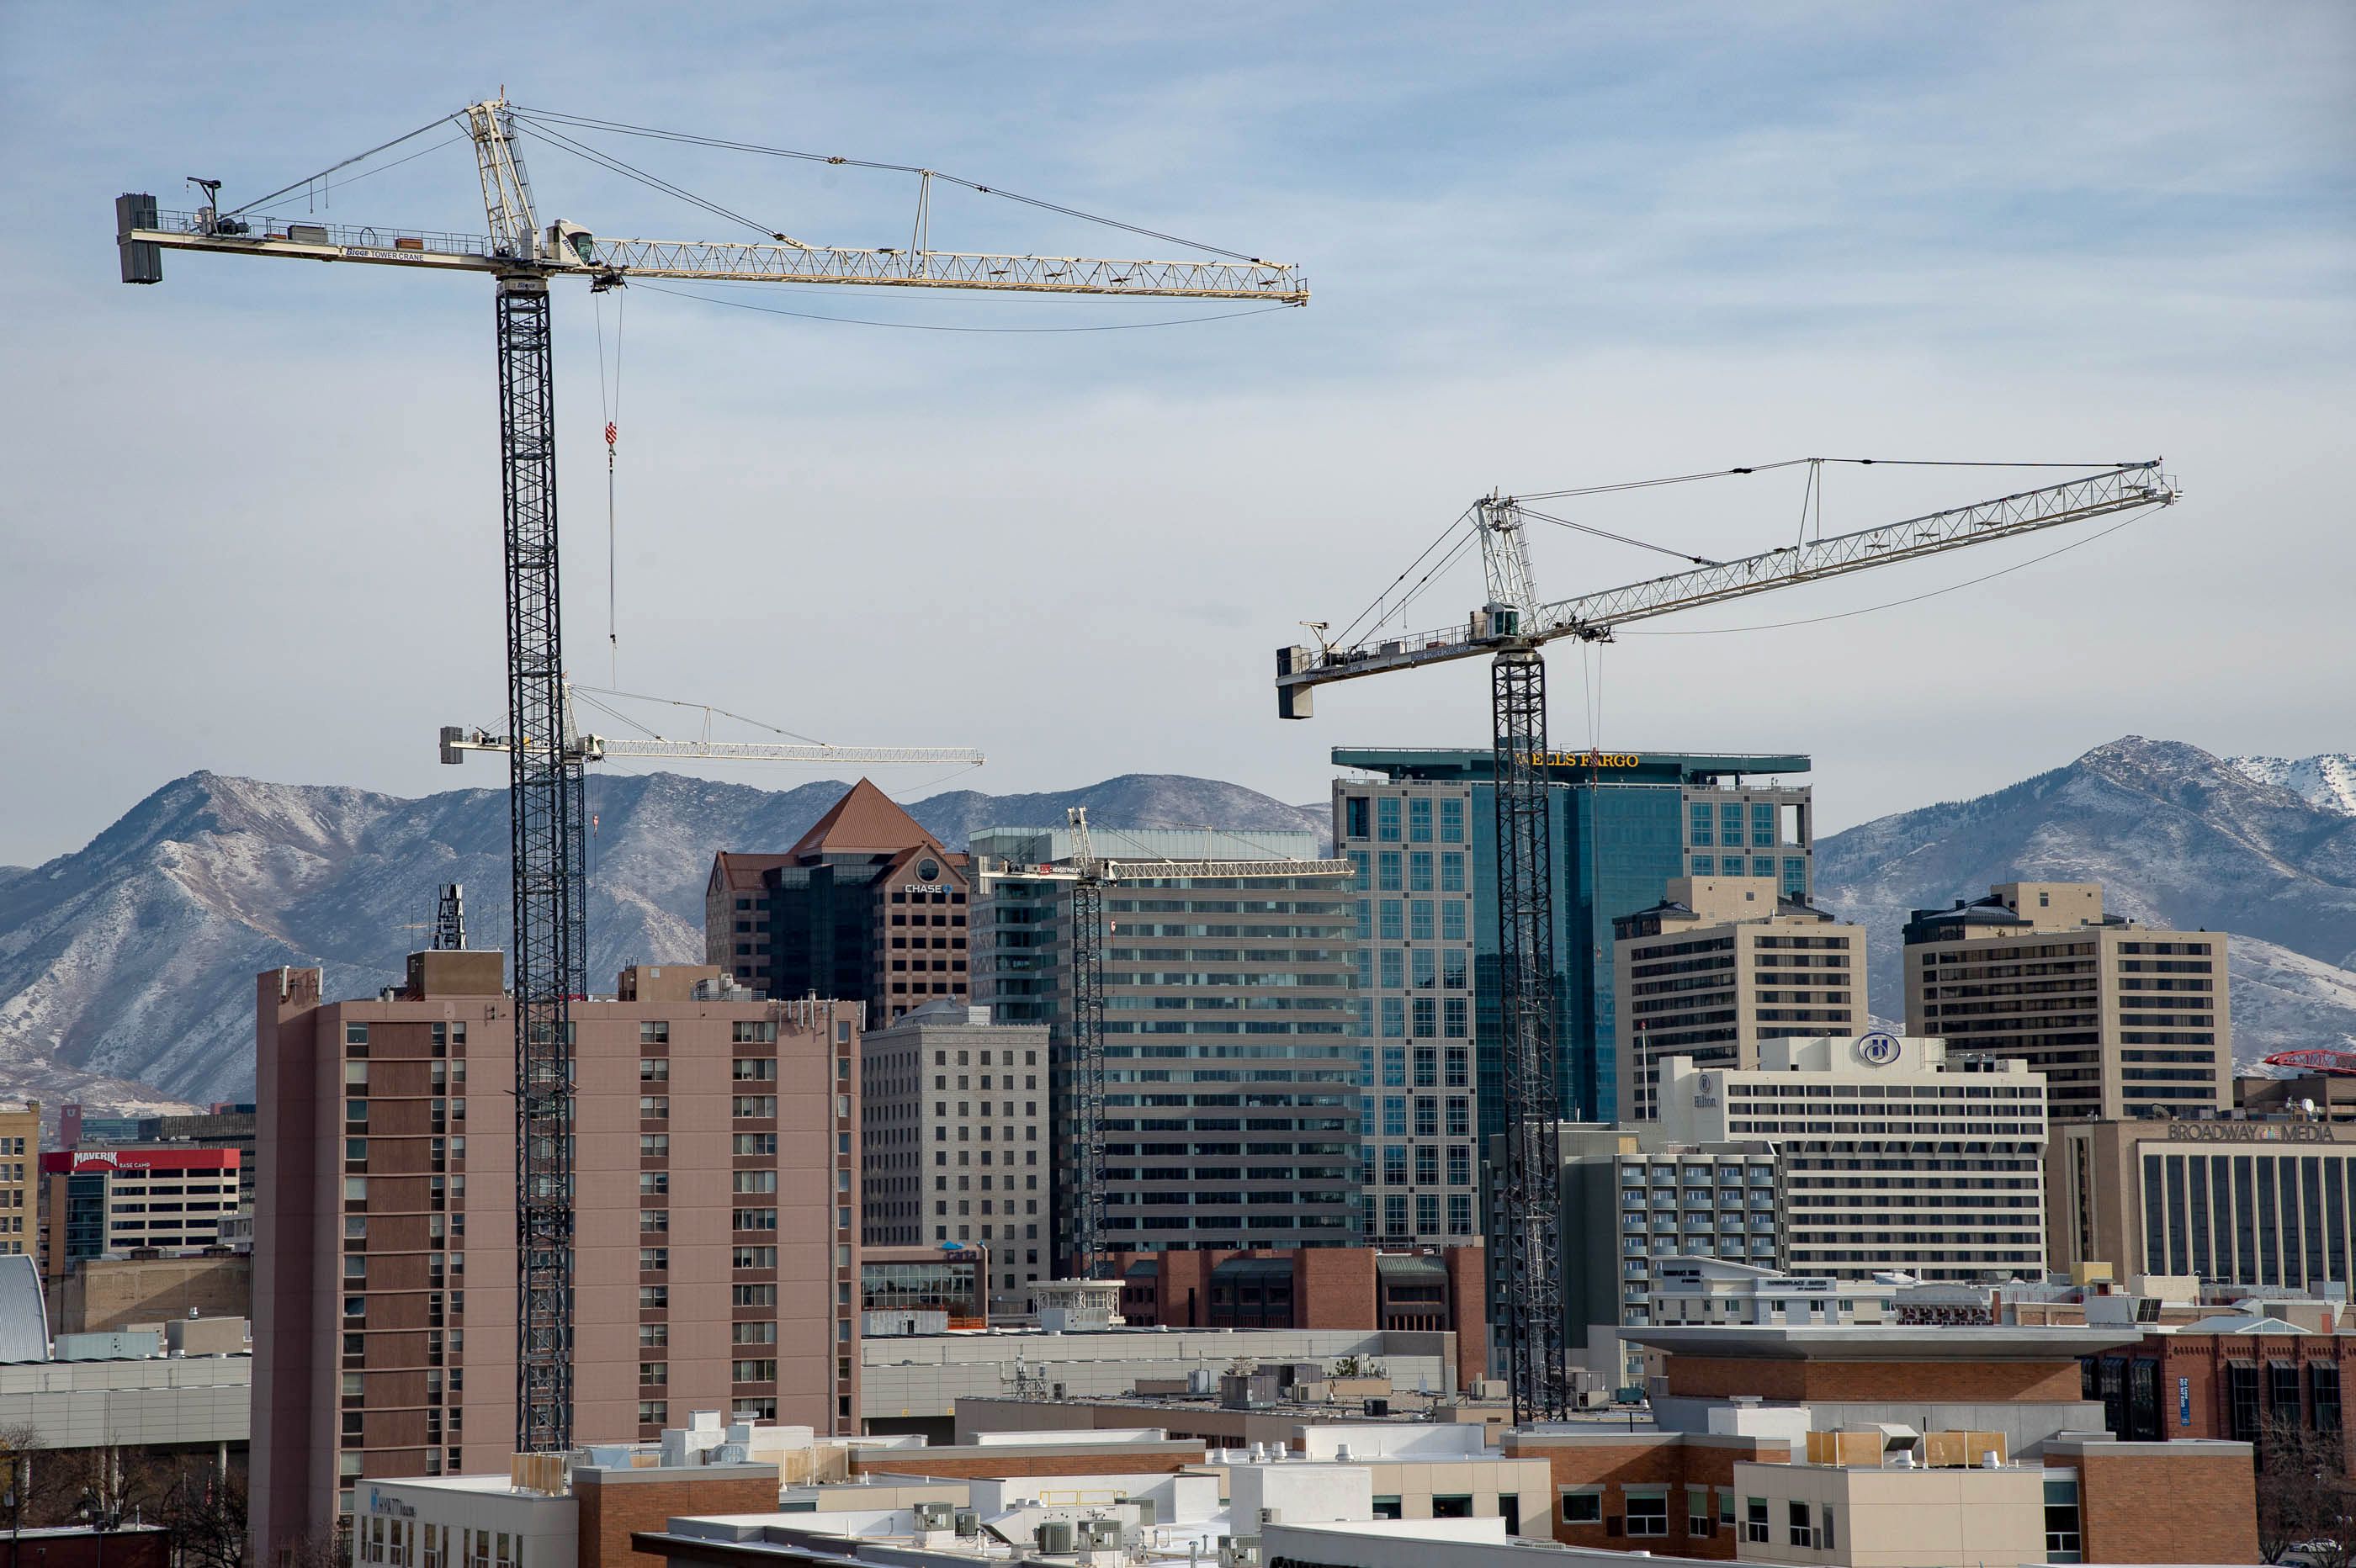 Commission approval brings new development to Salt Lake City